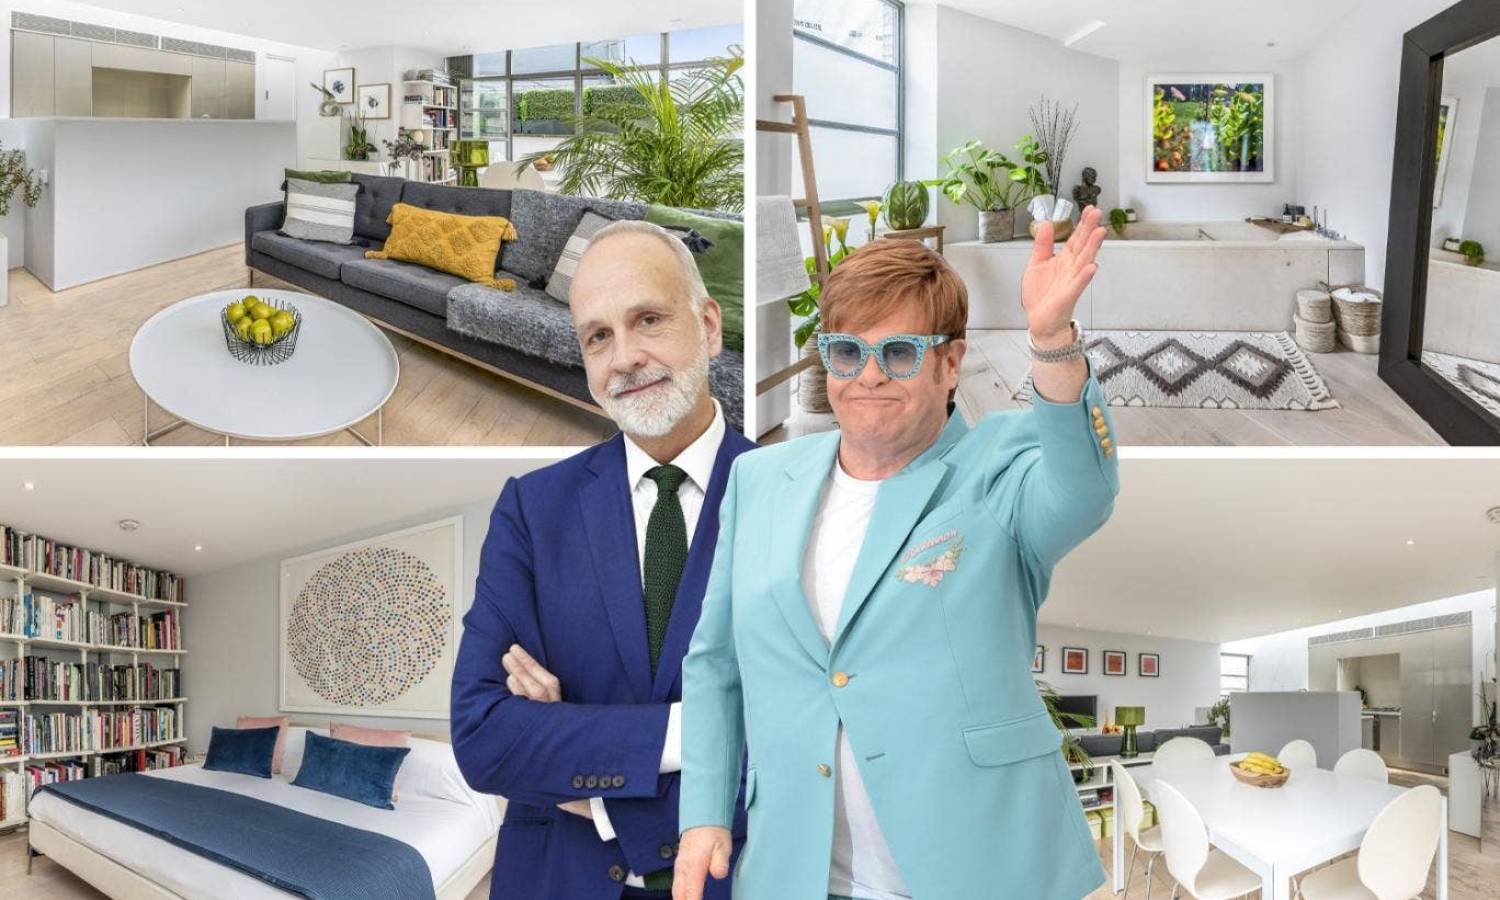 Celebrity tailor’s penthouse in Mayfair up for sale for £2,500,000